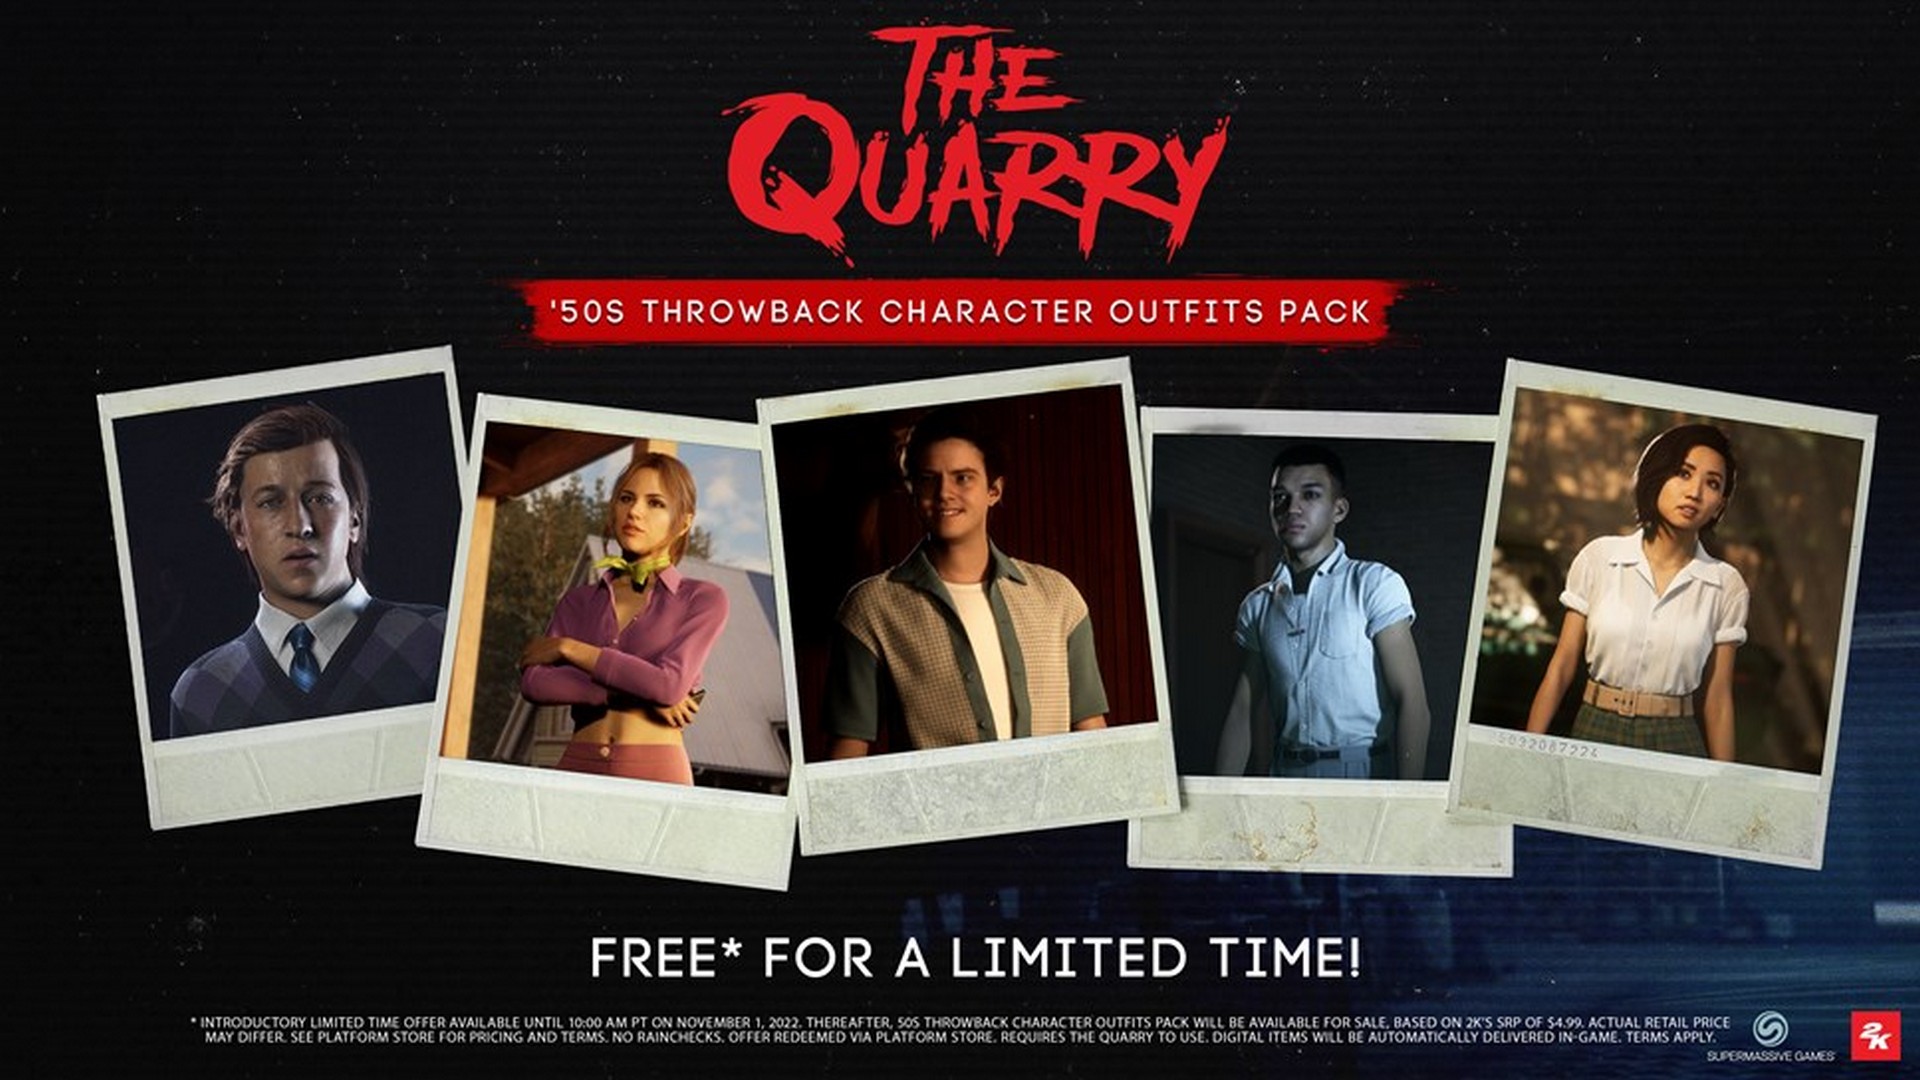 The Quarry Announces ‘50s Throwback Character Outfits Ahead of Halloween